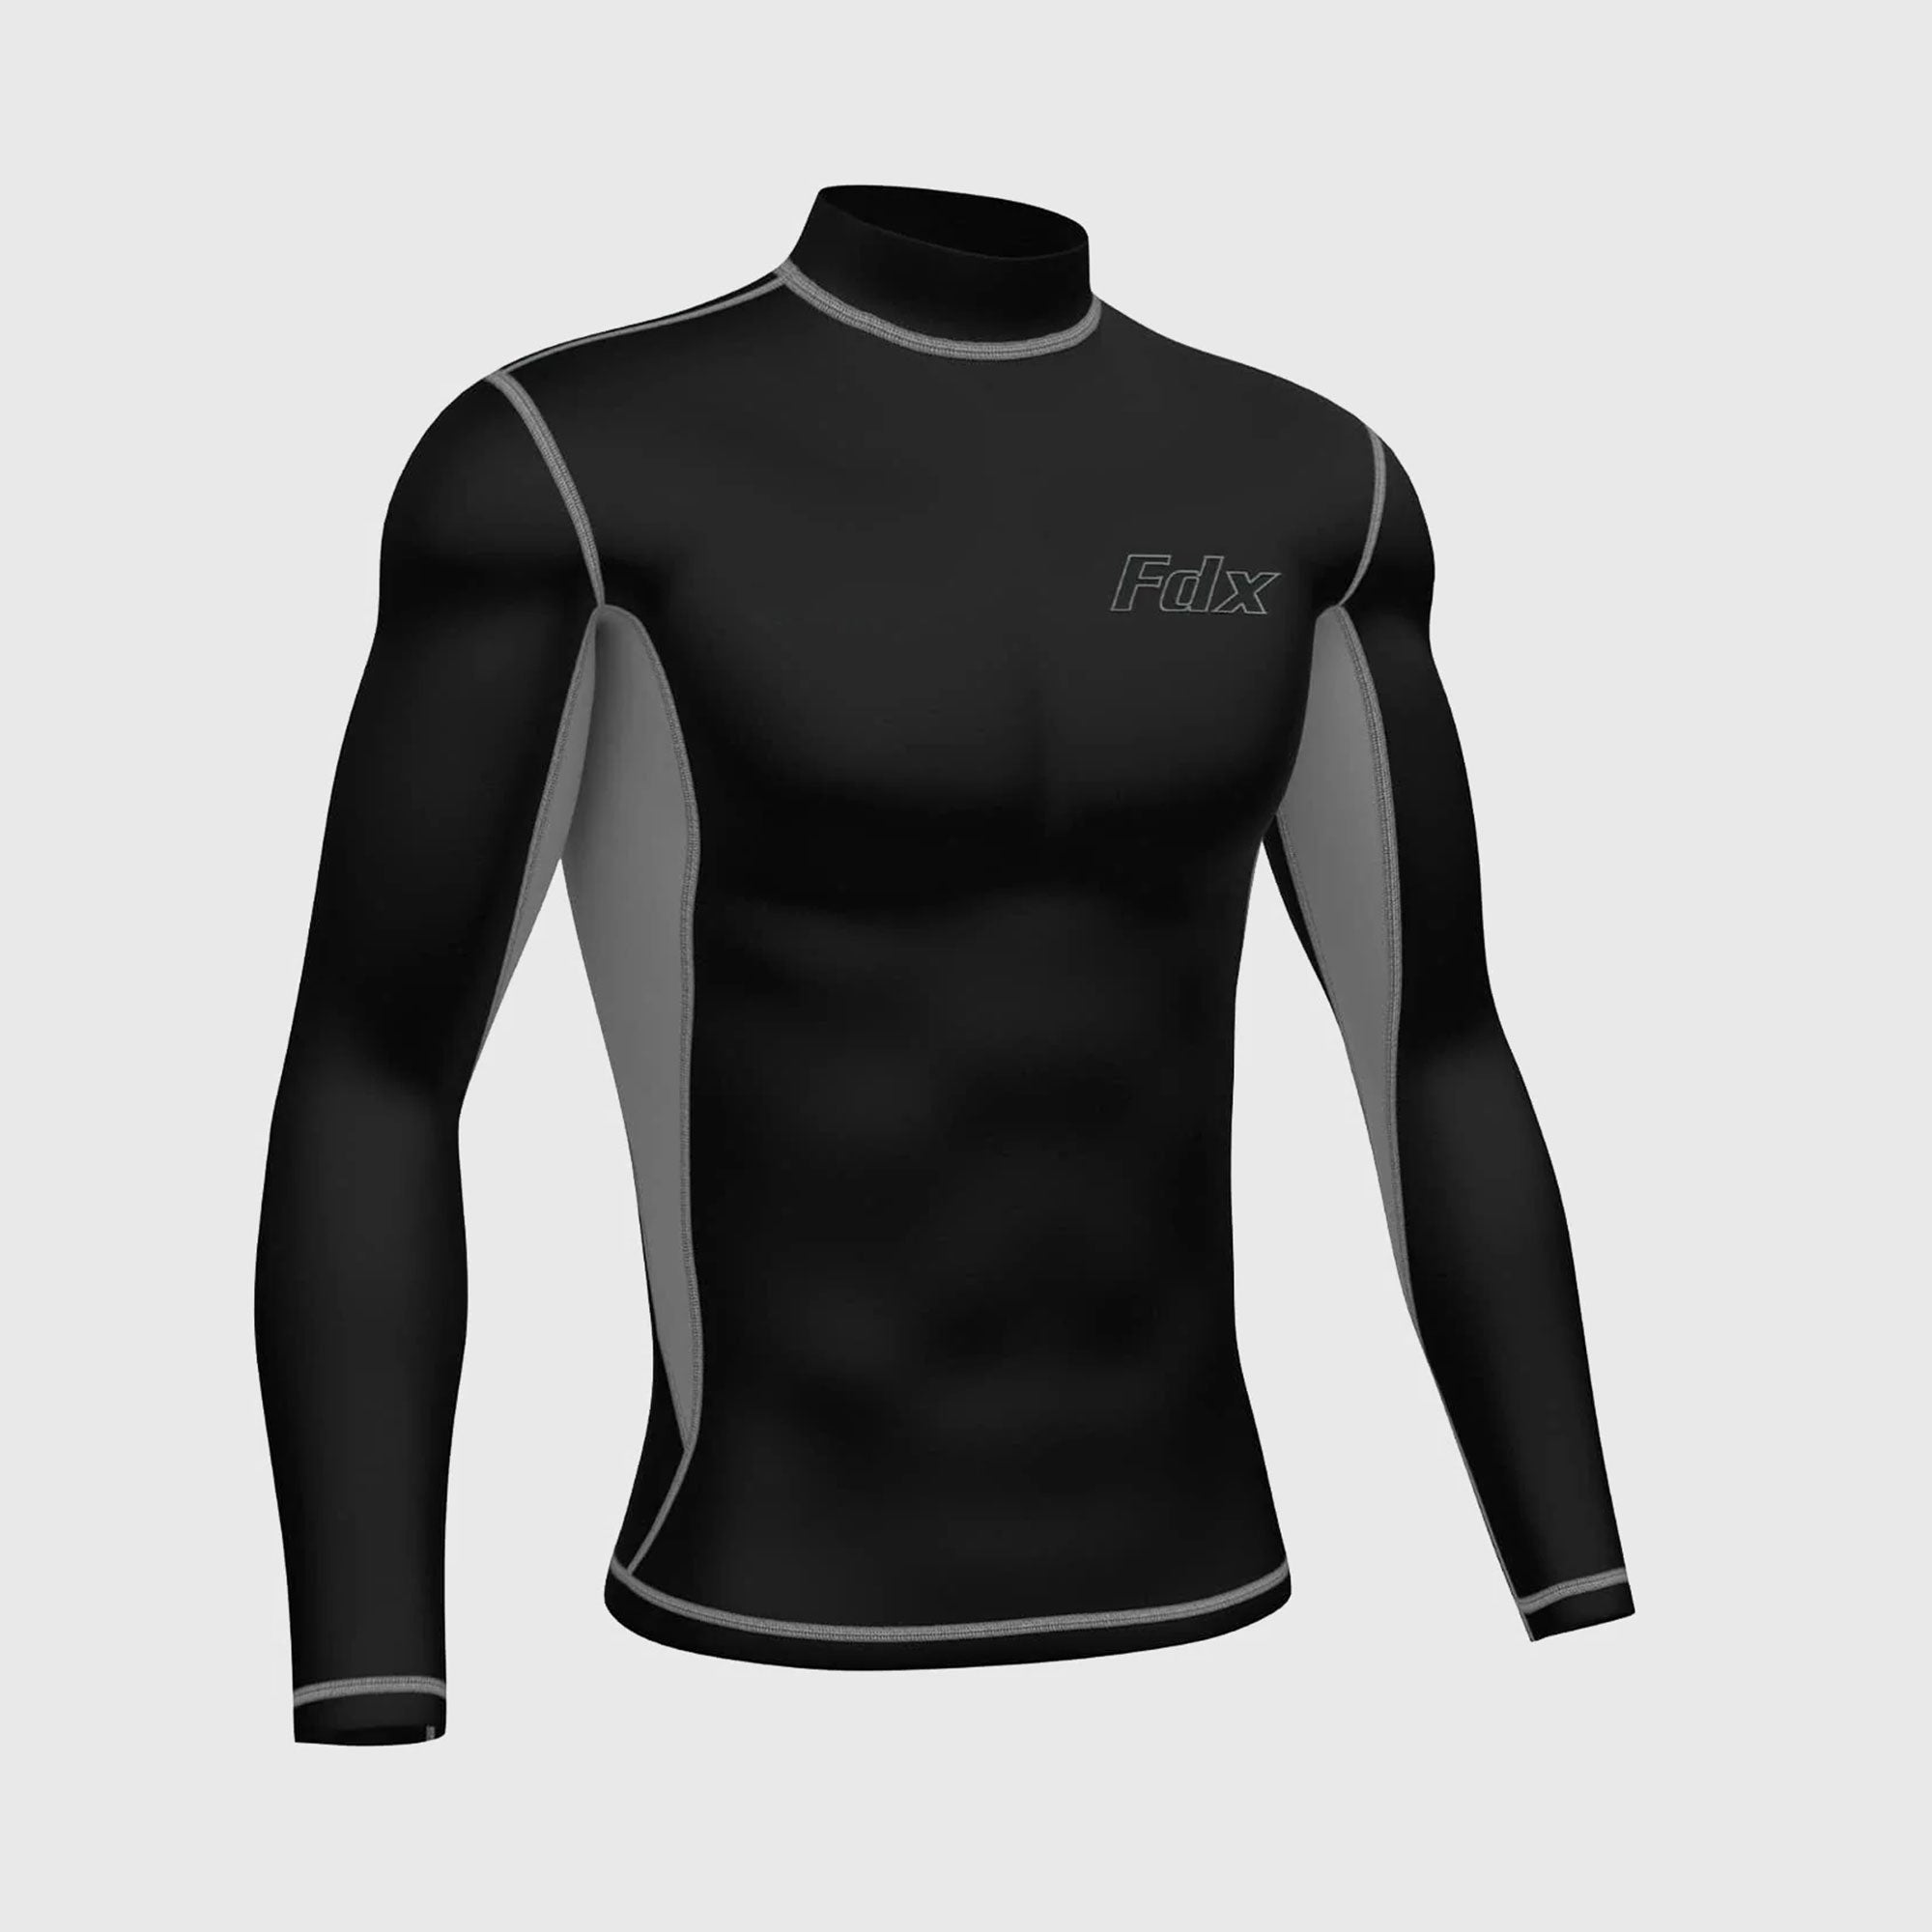 Fdx Mens Black & Grey Long Sleeve Compression Top Running Gym Workout Wear Rash Guard Stretchable Breathable - Inorex